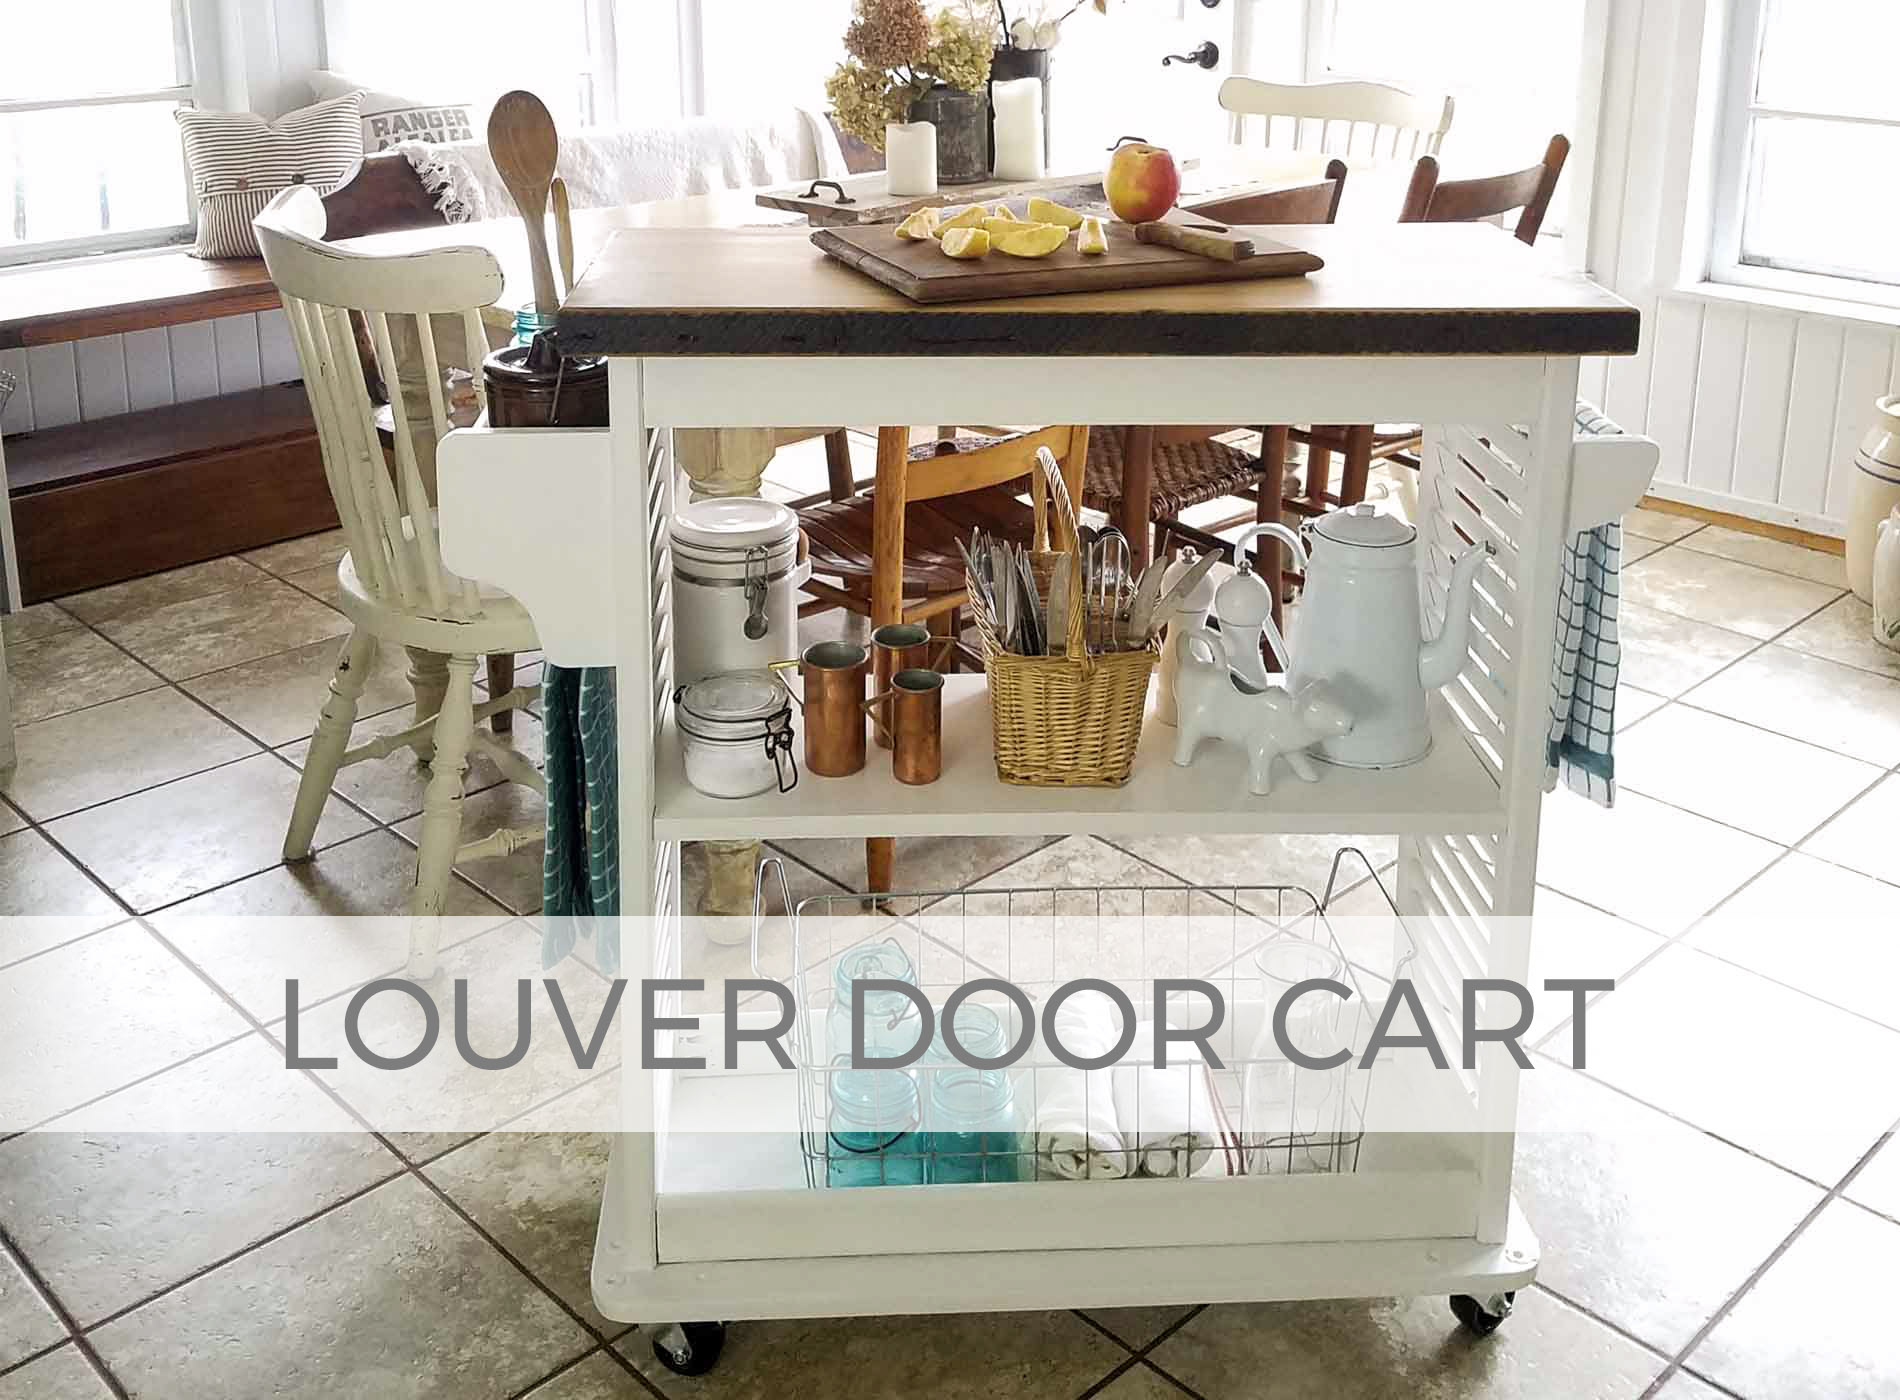 Upcycled Louver Door made into a Kitchen Cart by Larissa of Prodigal Pieces | prodigalpieces.com